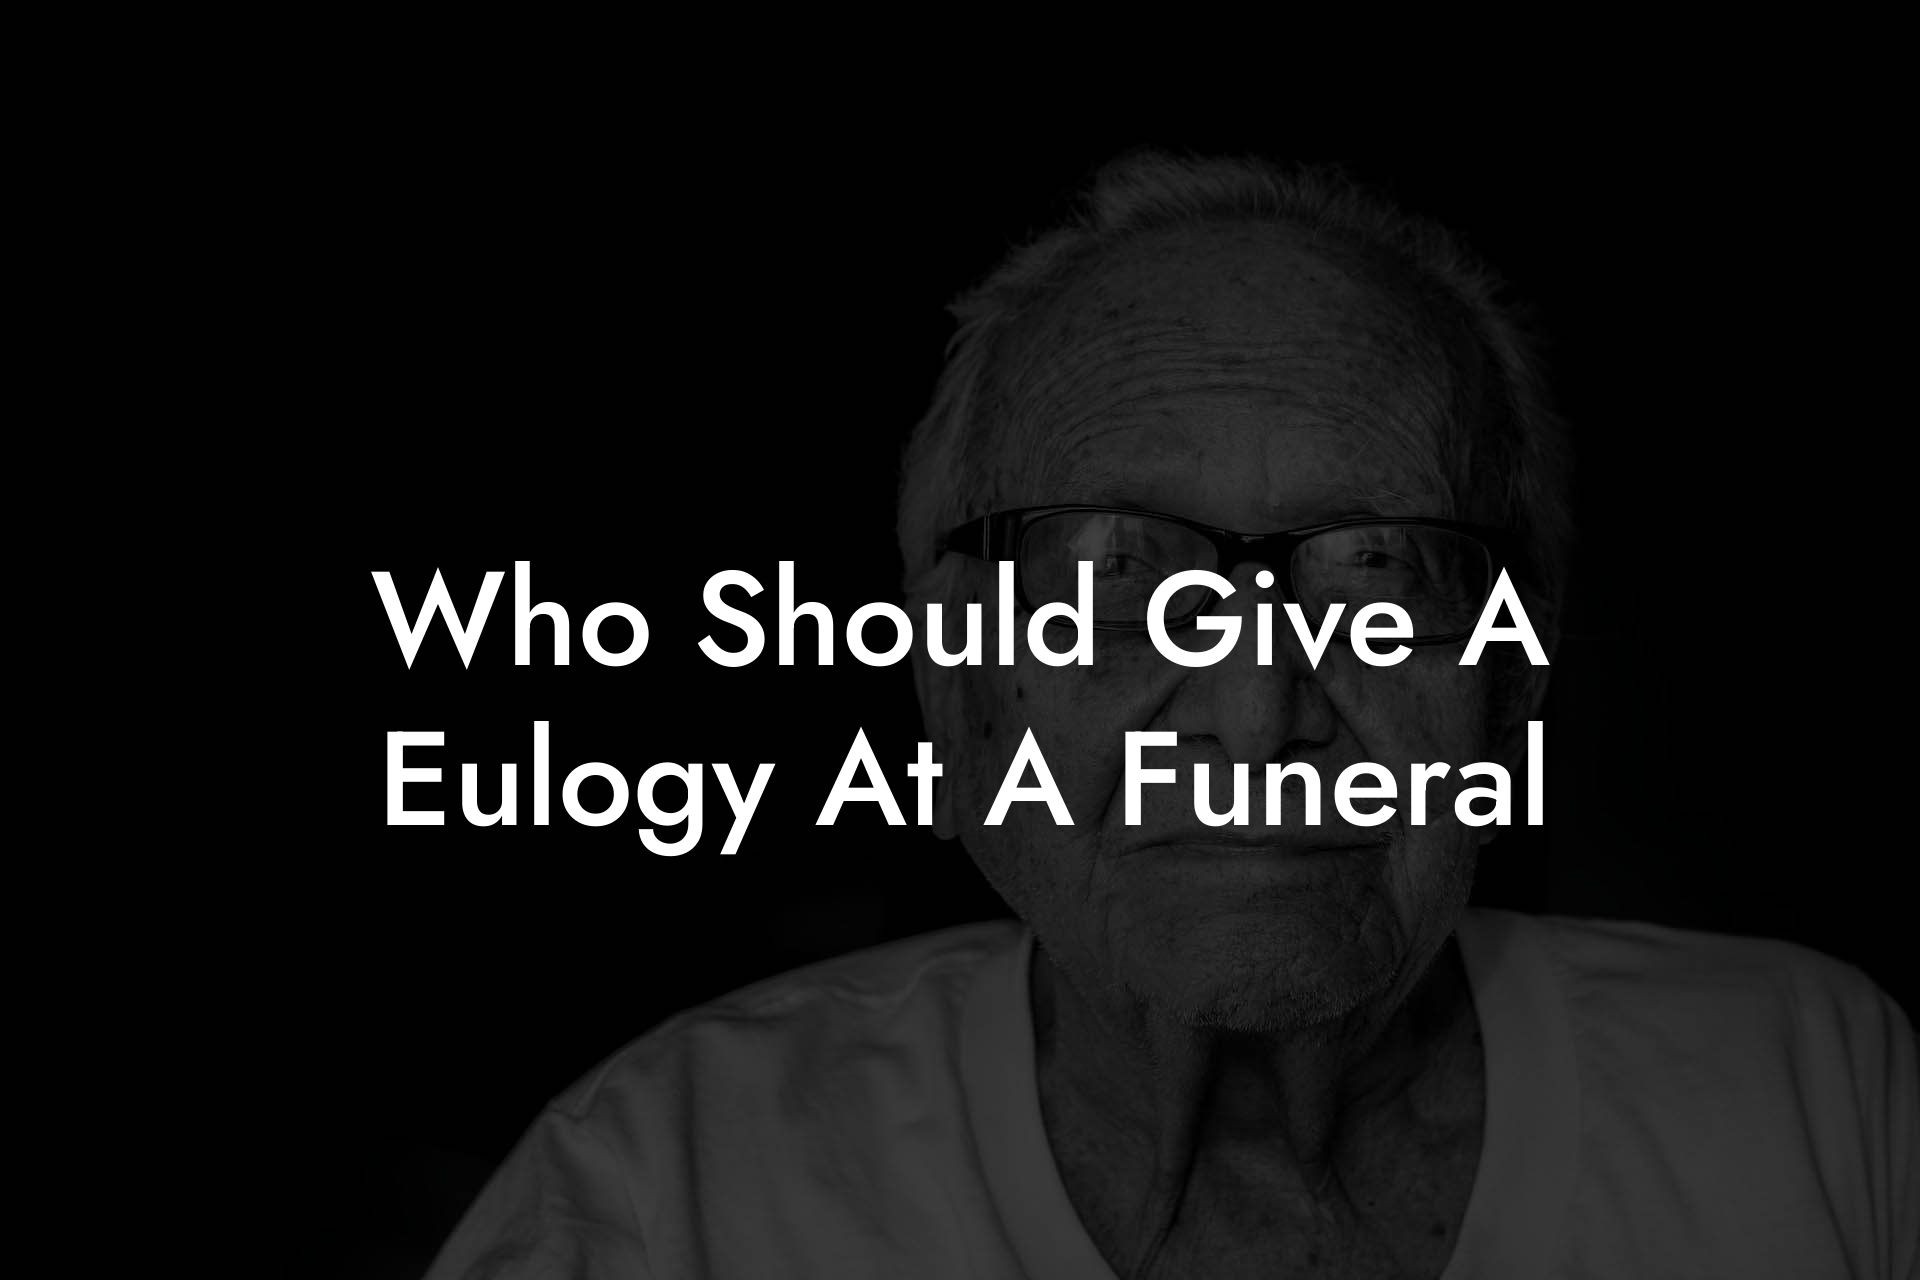 Who Should Give A Eulogy At A Funeral